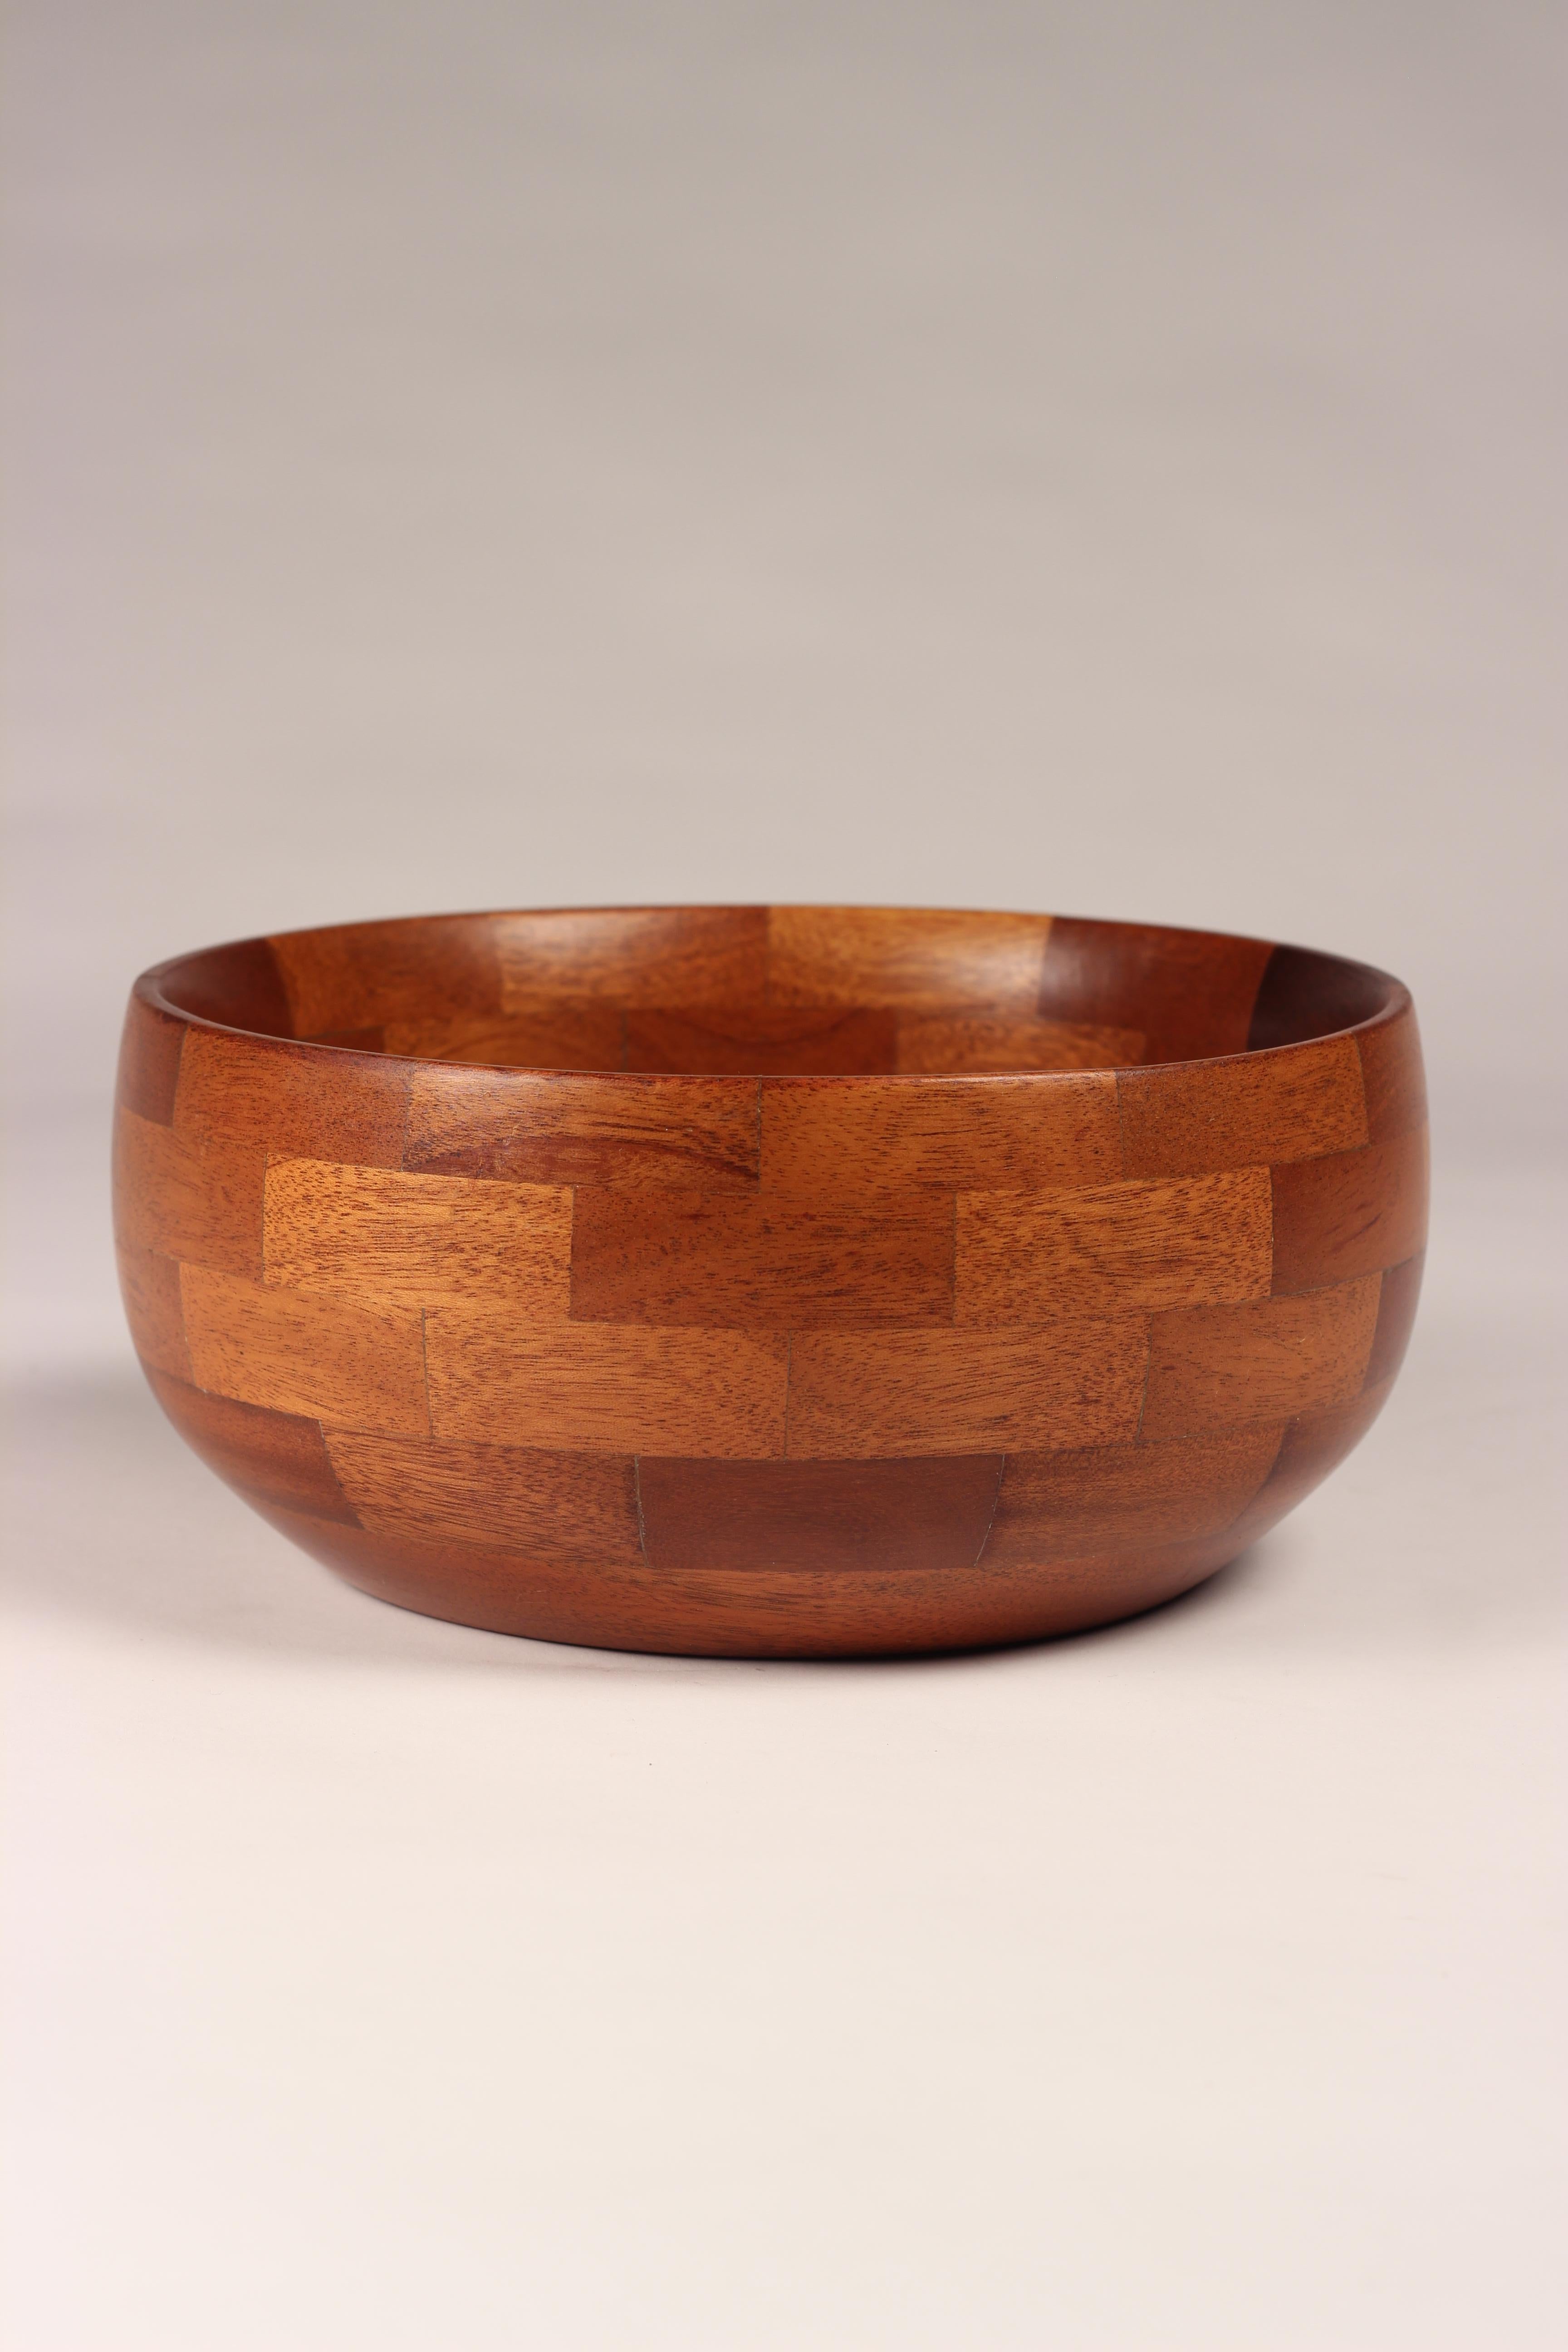 Scandinavian staved and turned teak bowl of good proportions. It has been re oiled and wax polished, with a new felt base cut.